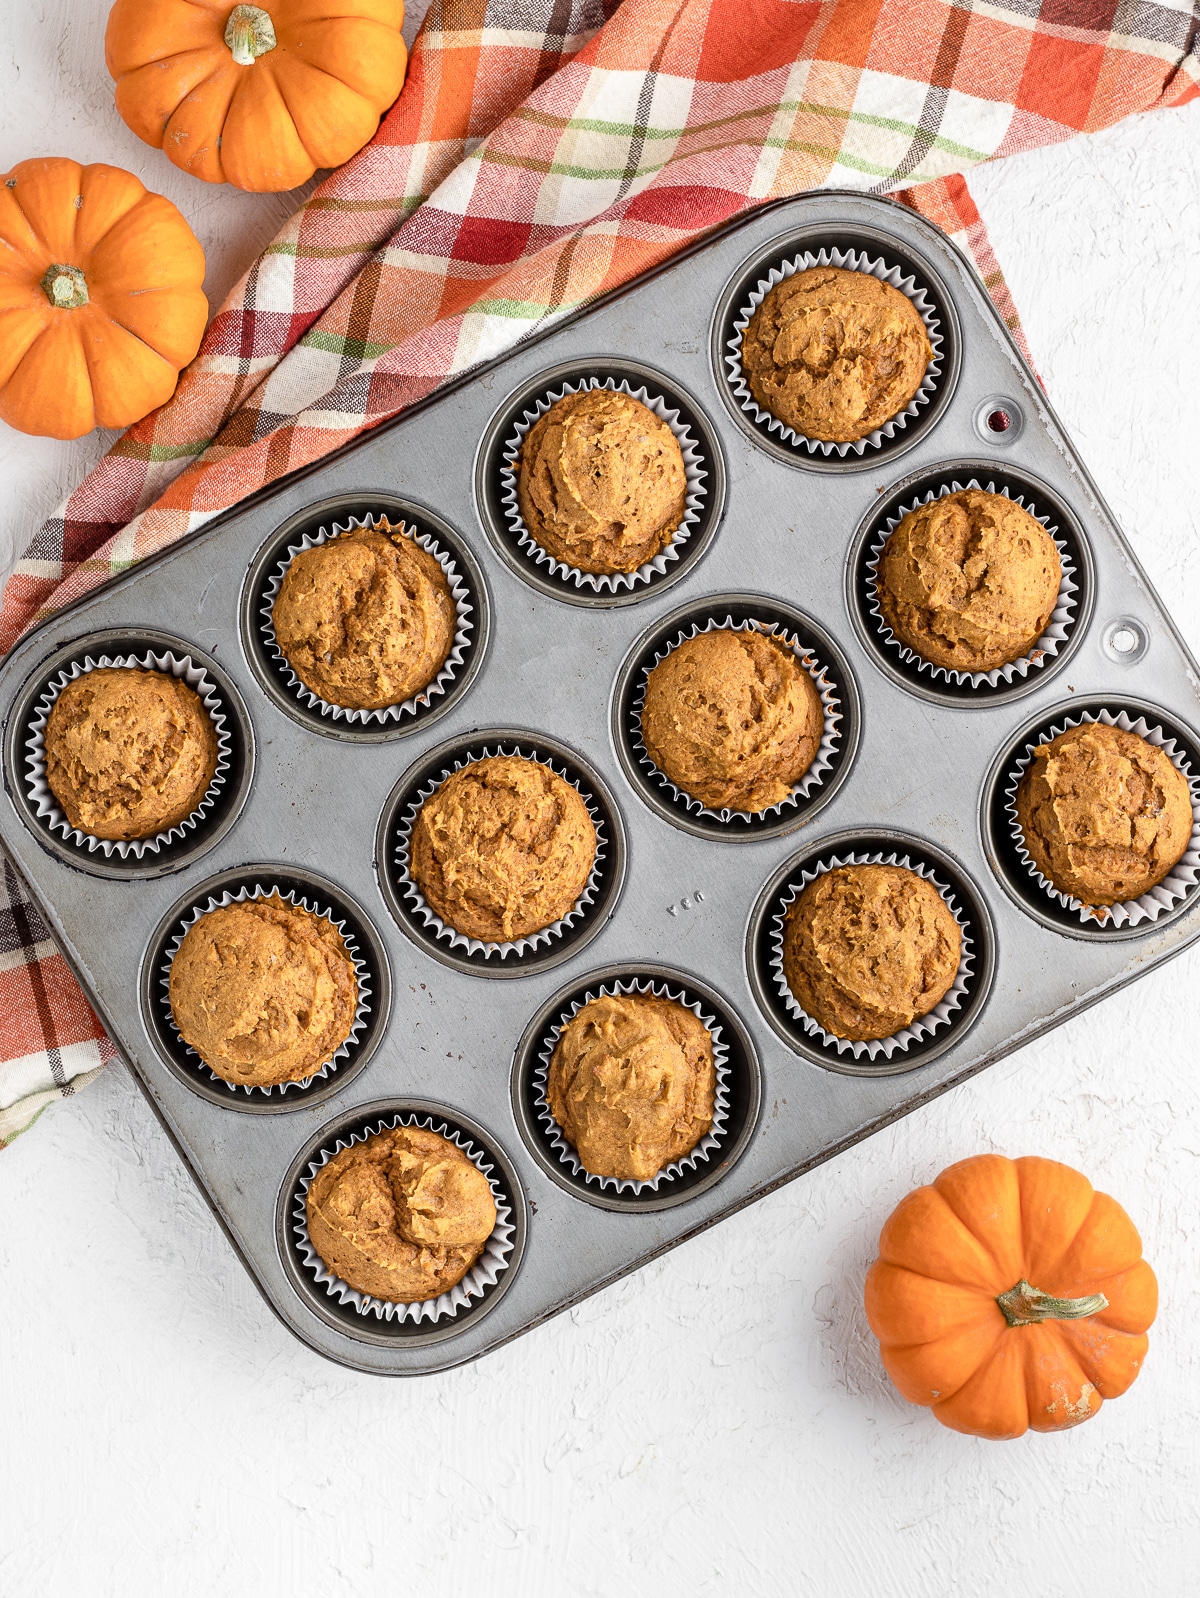 Pumpkin Muffins in baked and ready to eat.